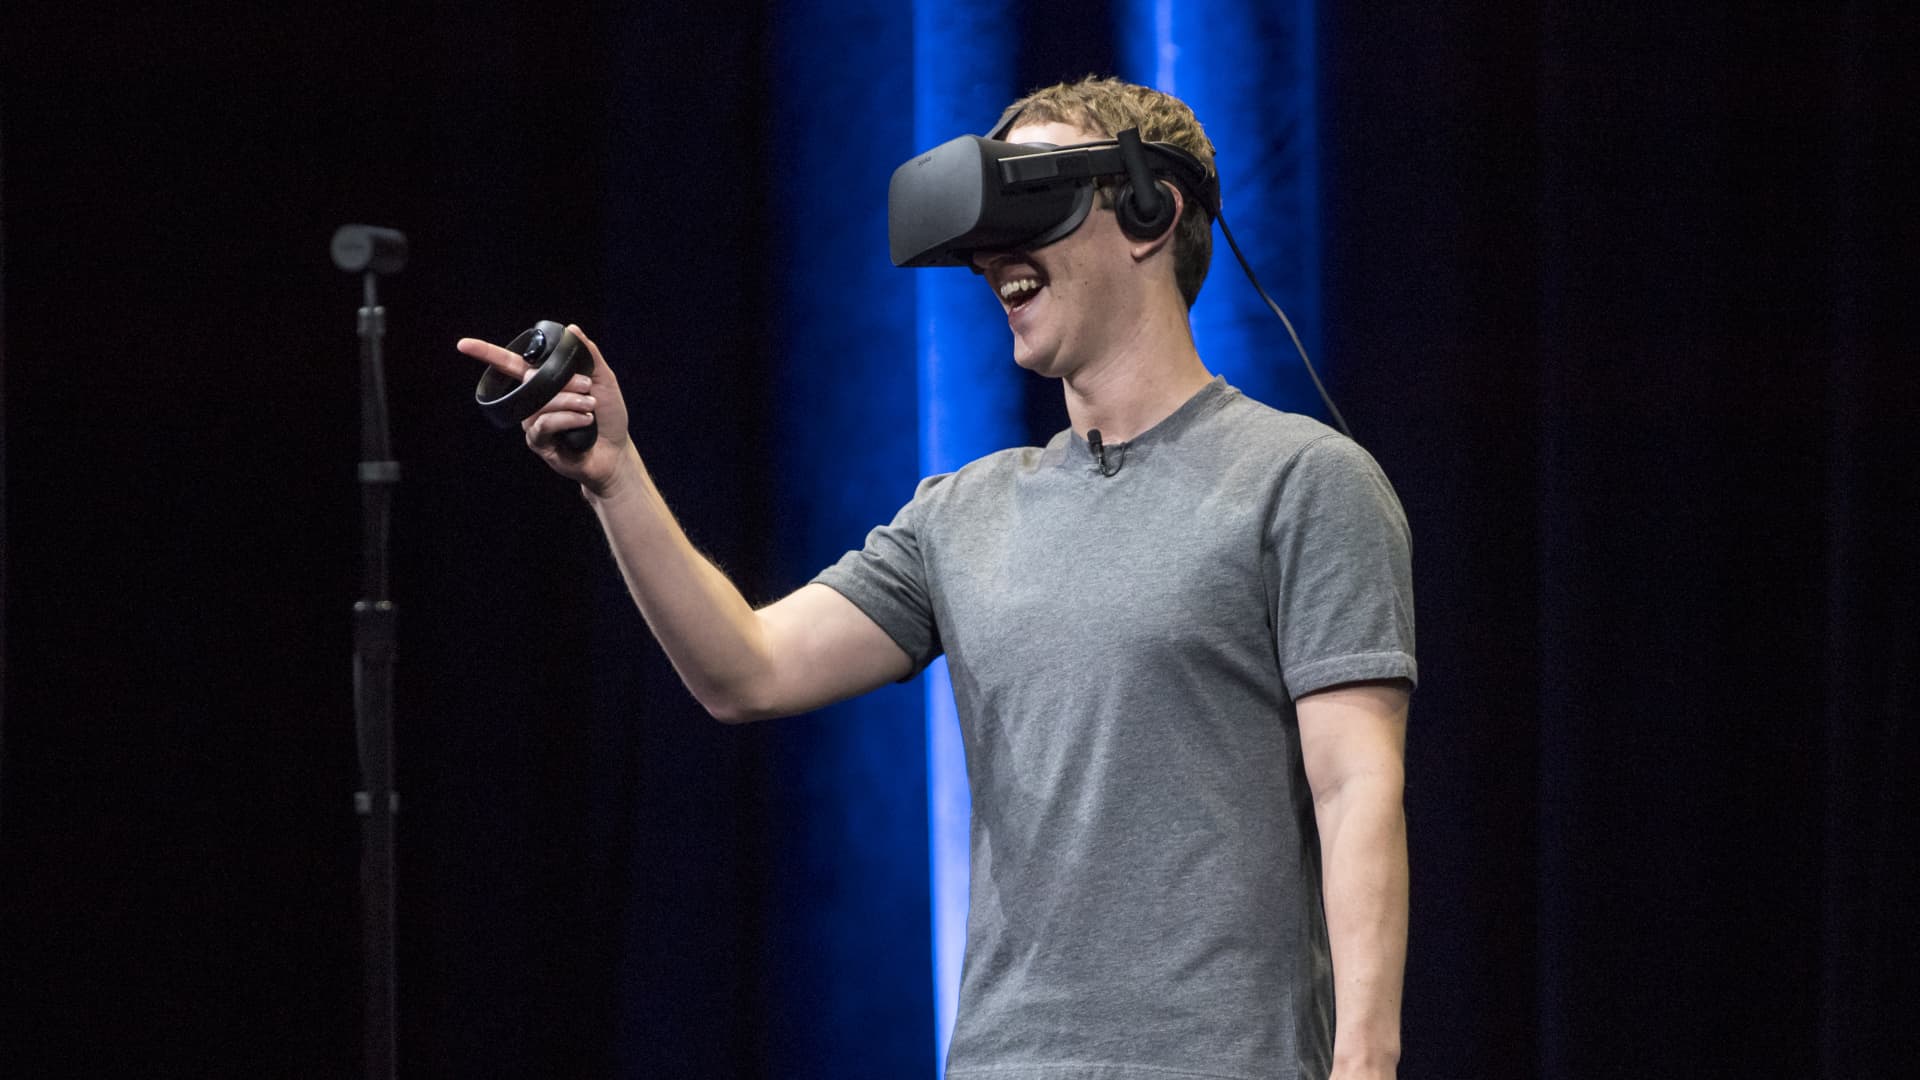 What Happened To Oculus Rift?